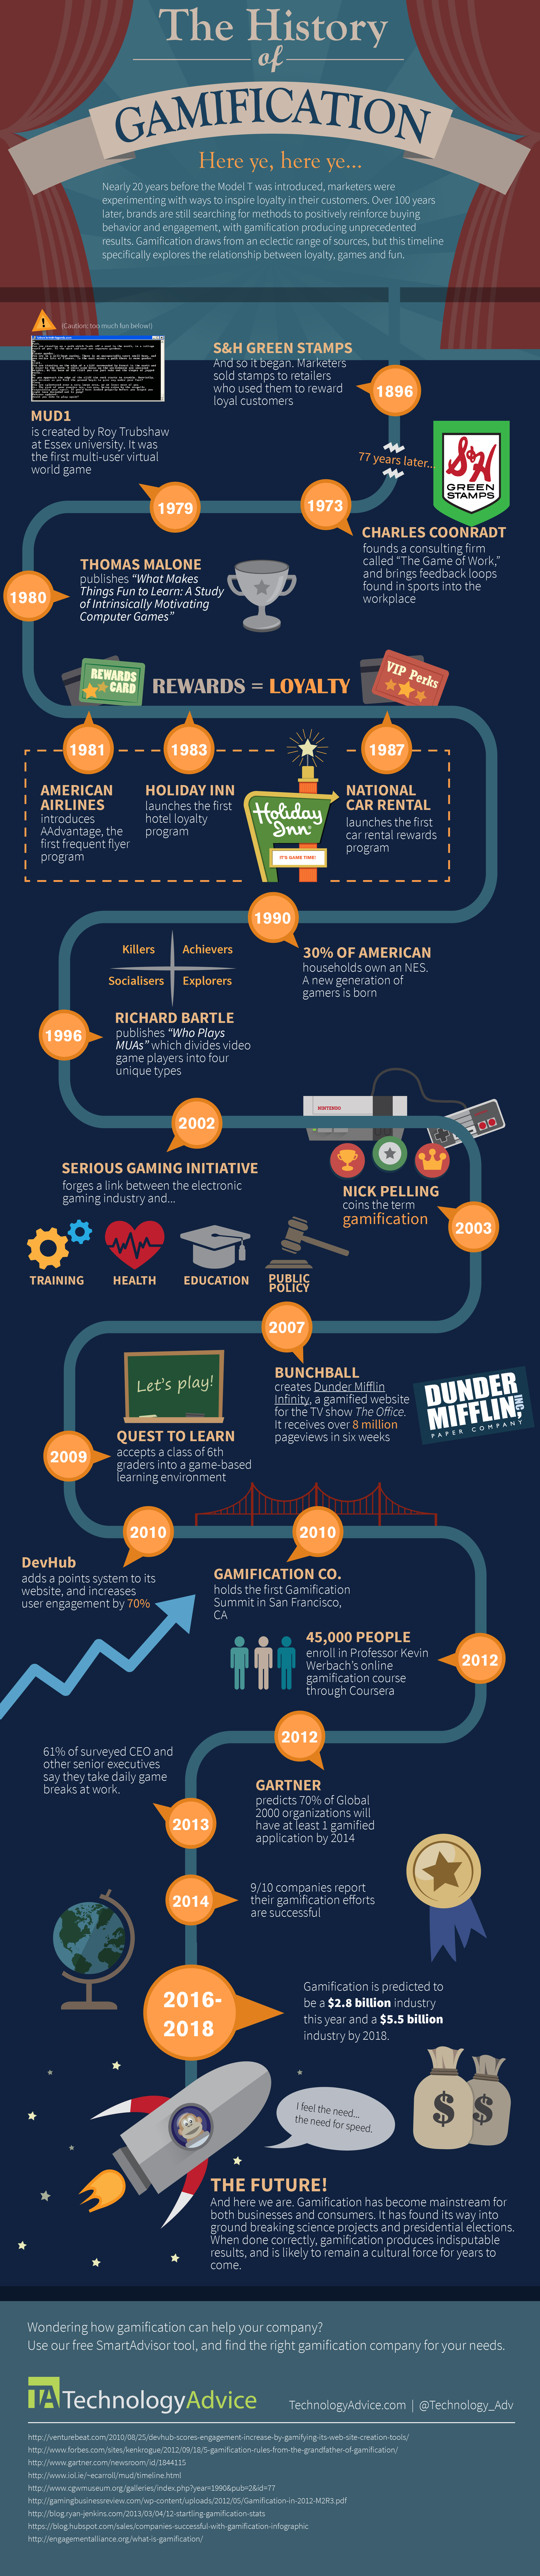 History of Gamification